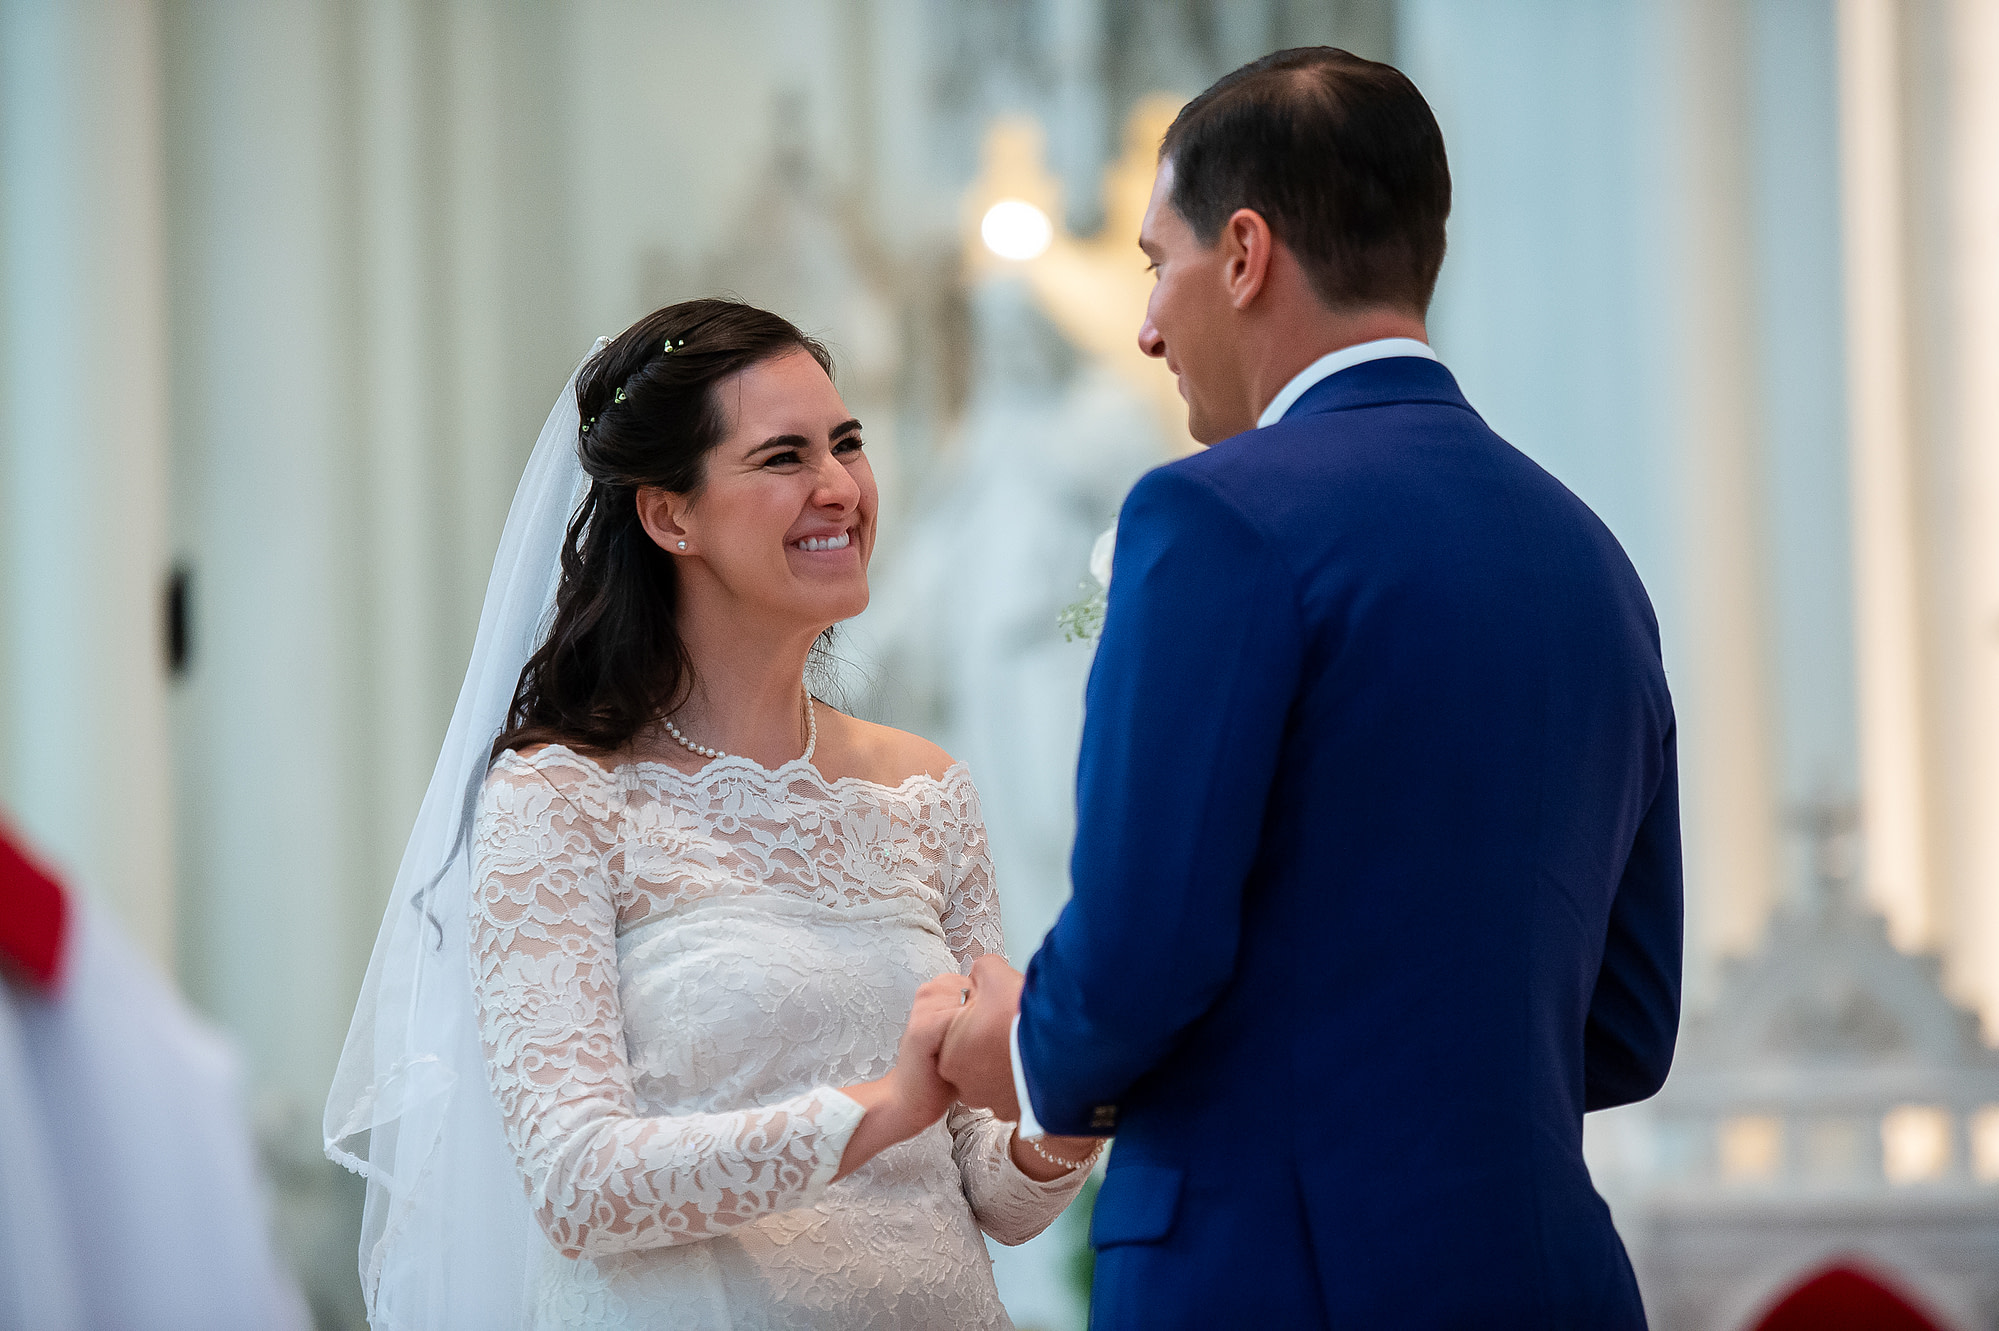 Bride smiles at groom during their wedding at the Cathedral Basilica of the Immaculate Conception in Denver, Colorado.